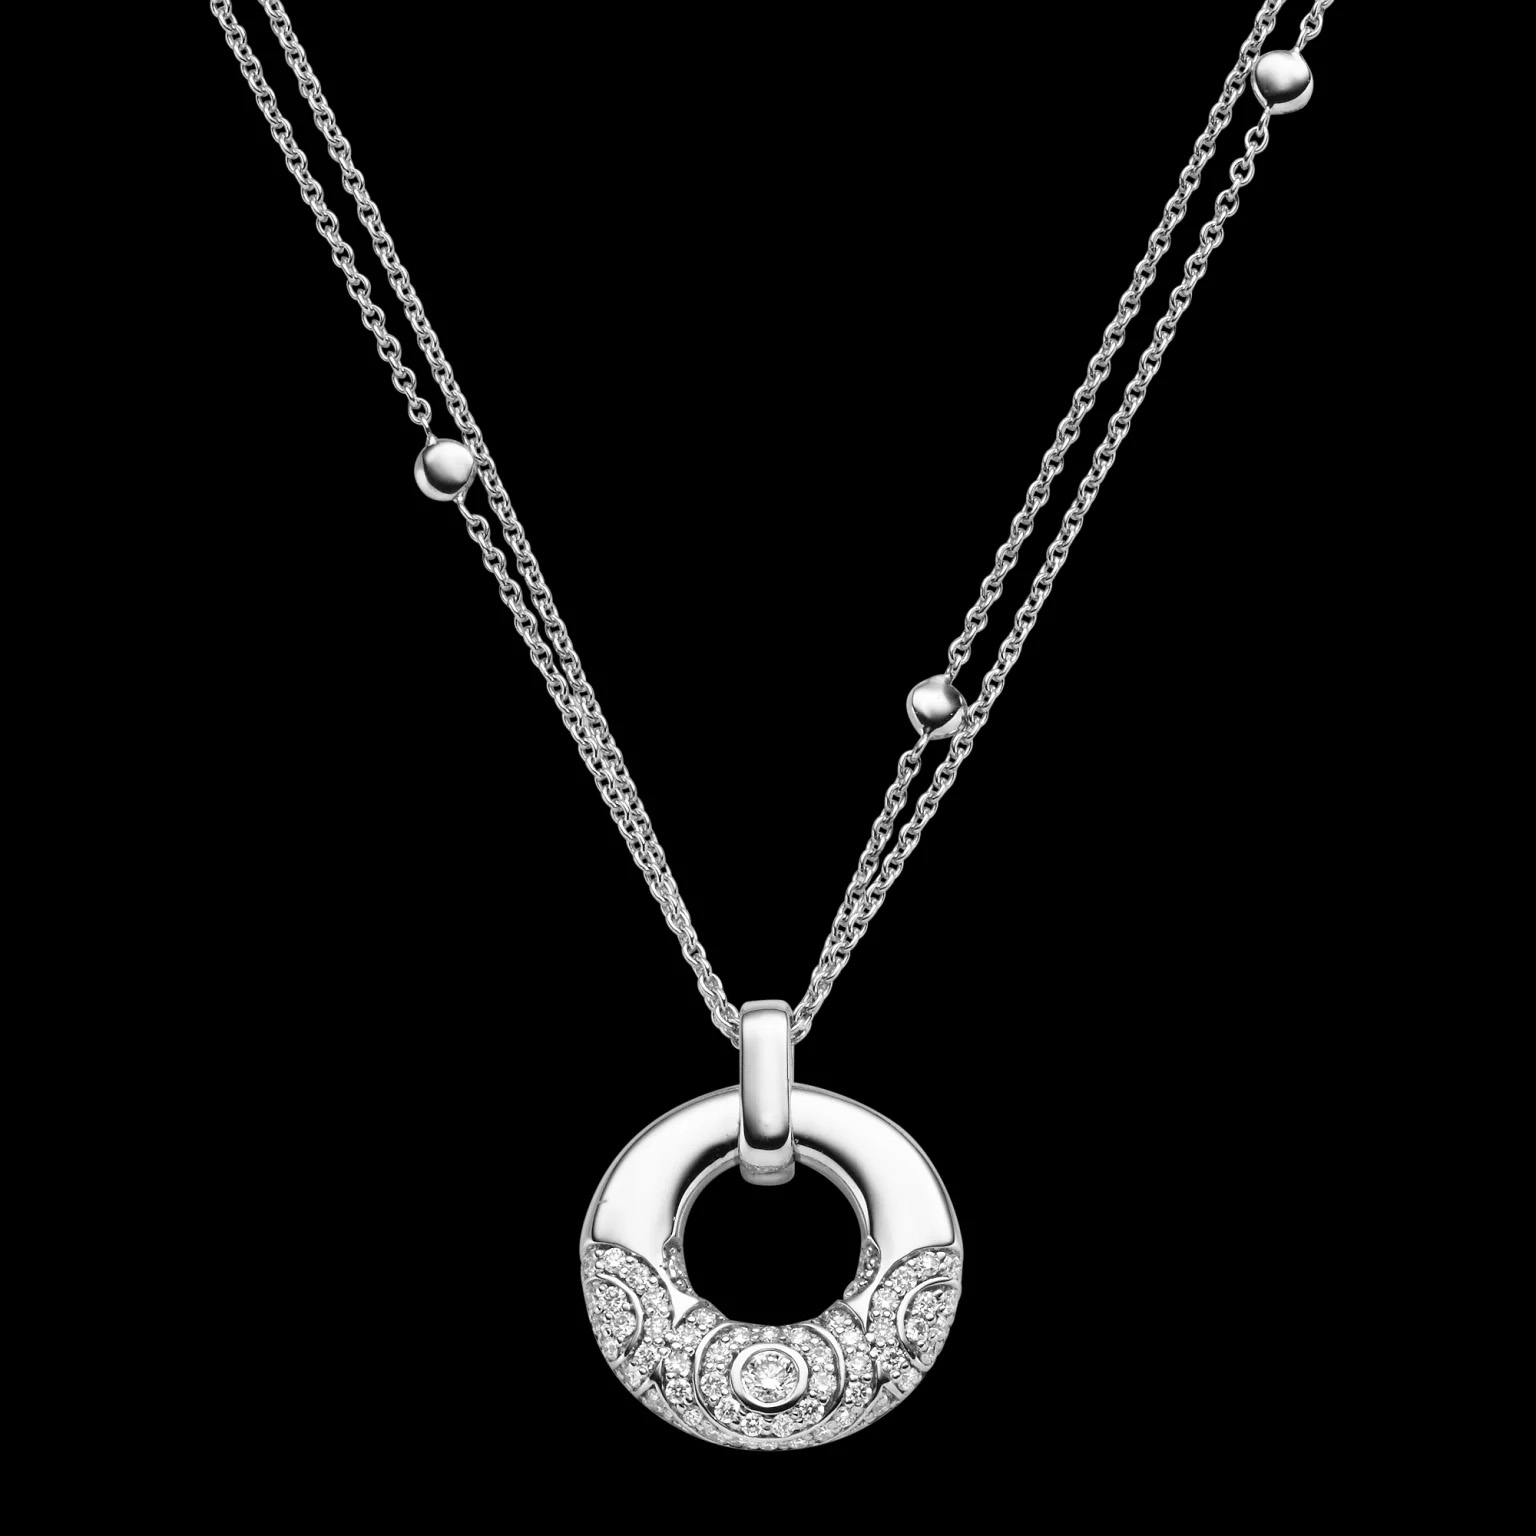 Wholesale silver cz OEM/ODM Jewelry pendant necklace are designed using 925 sterling silver jewelry OEM factory